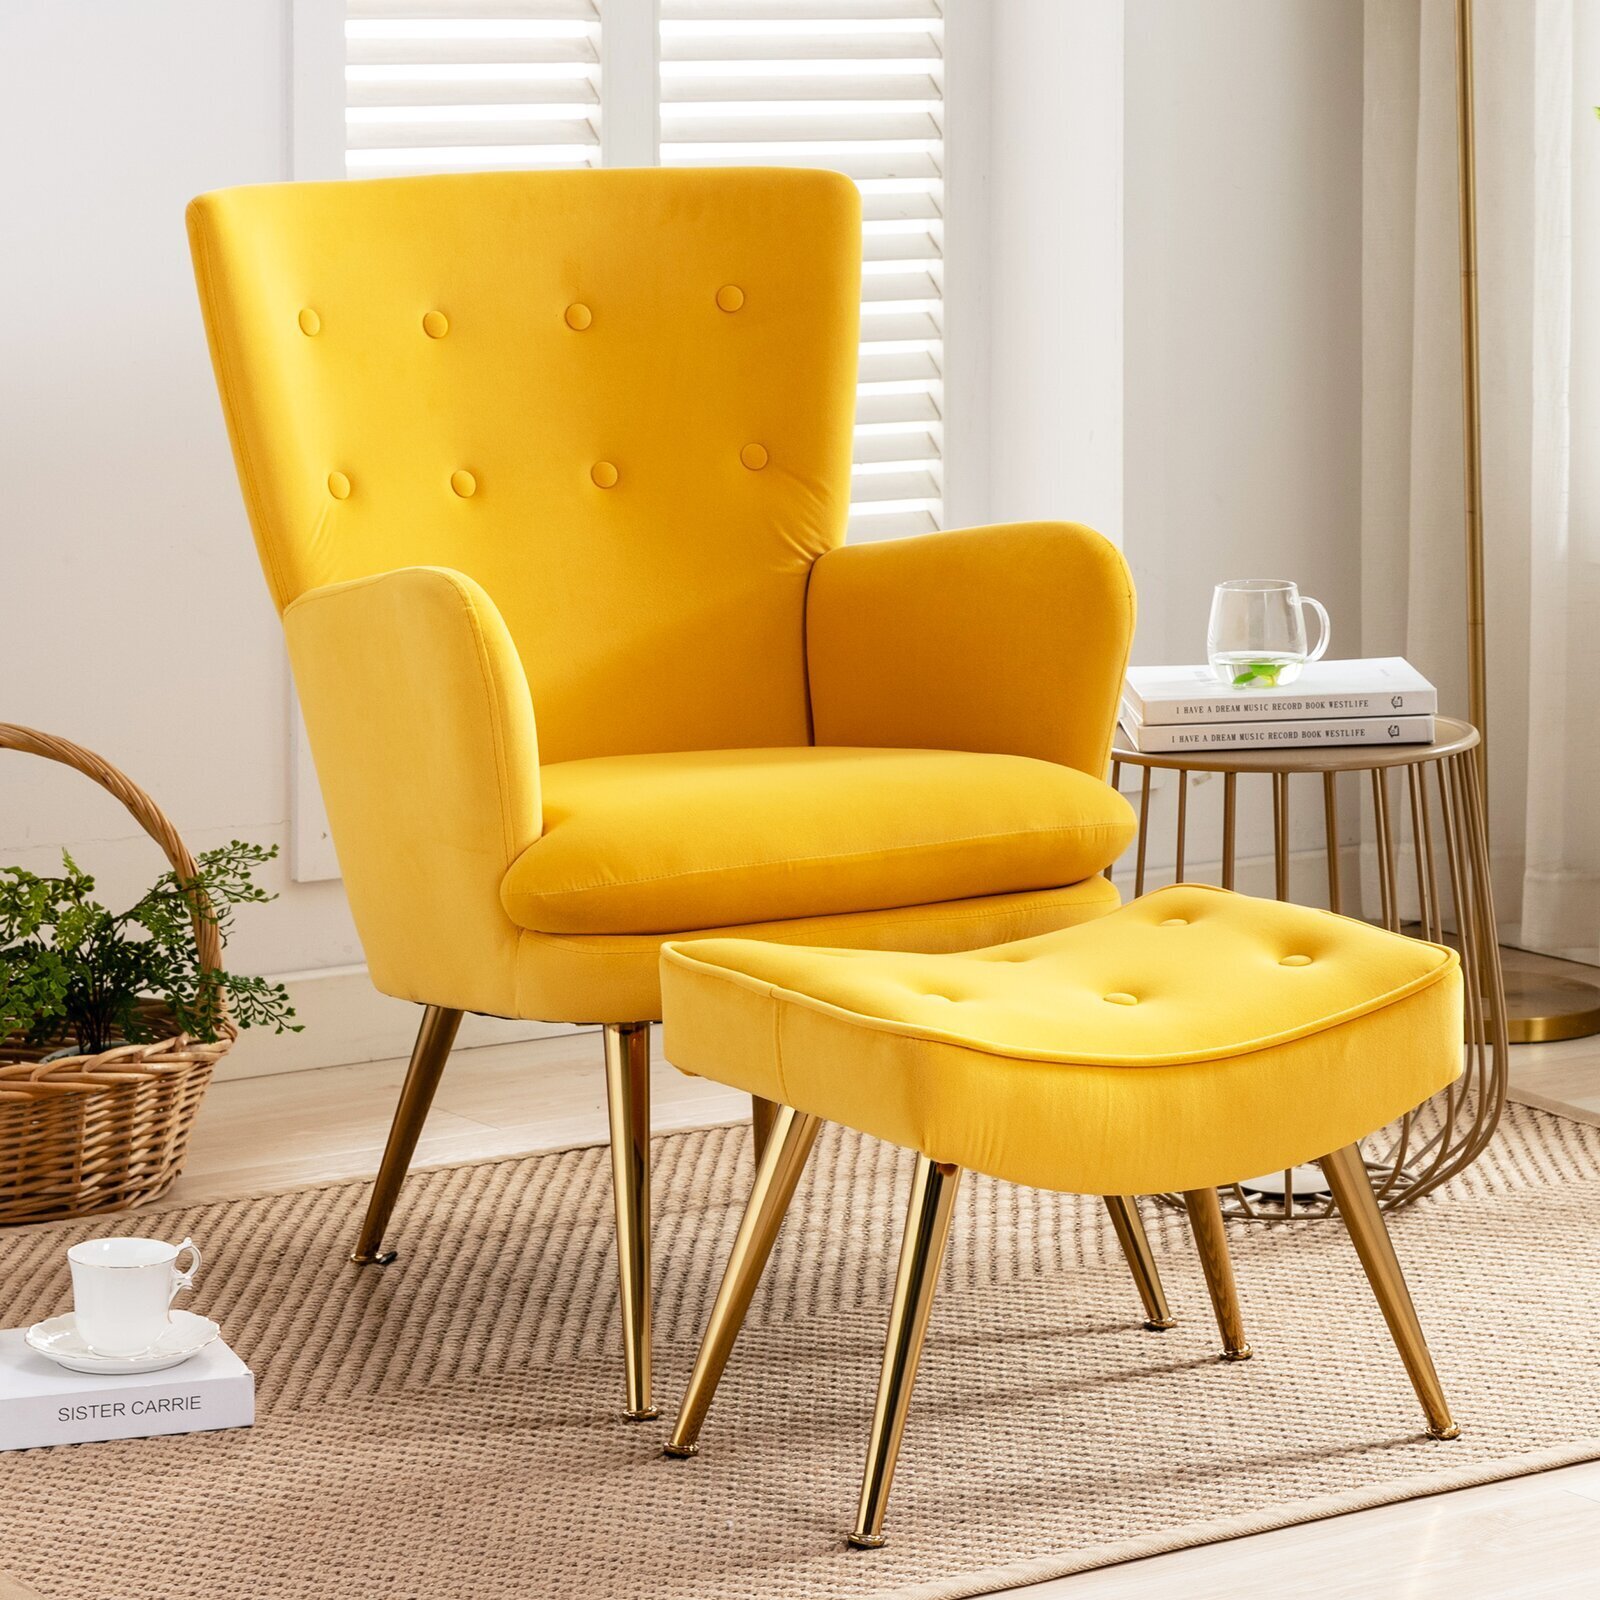 Light Yellow Chair with Ottoman